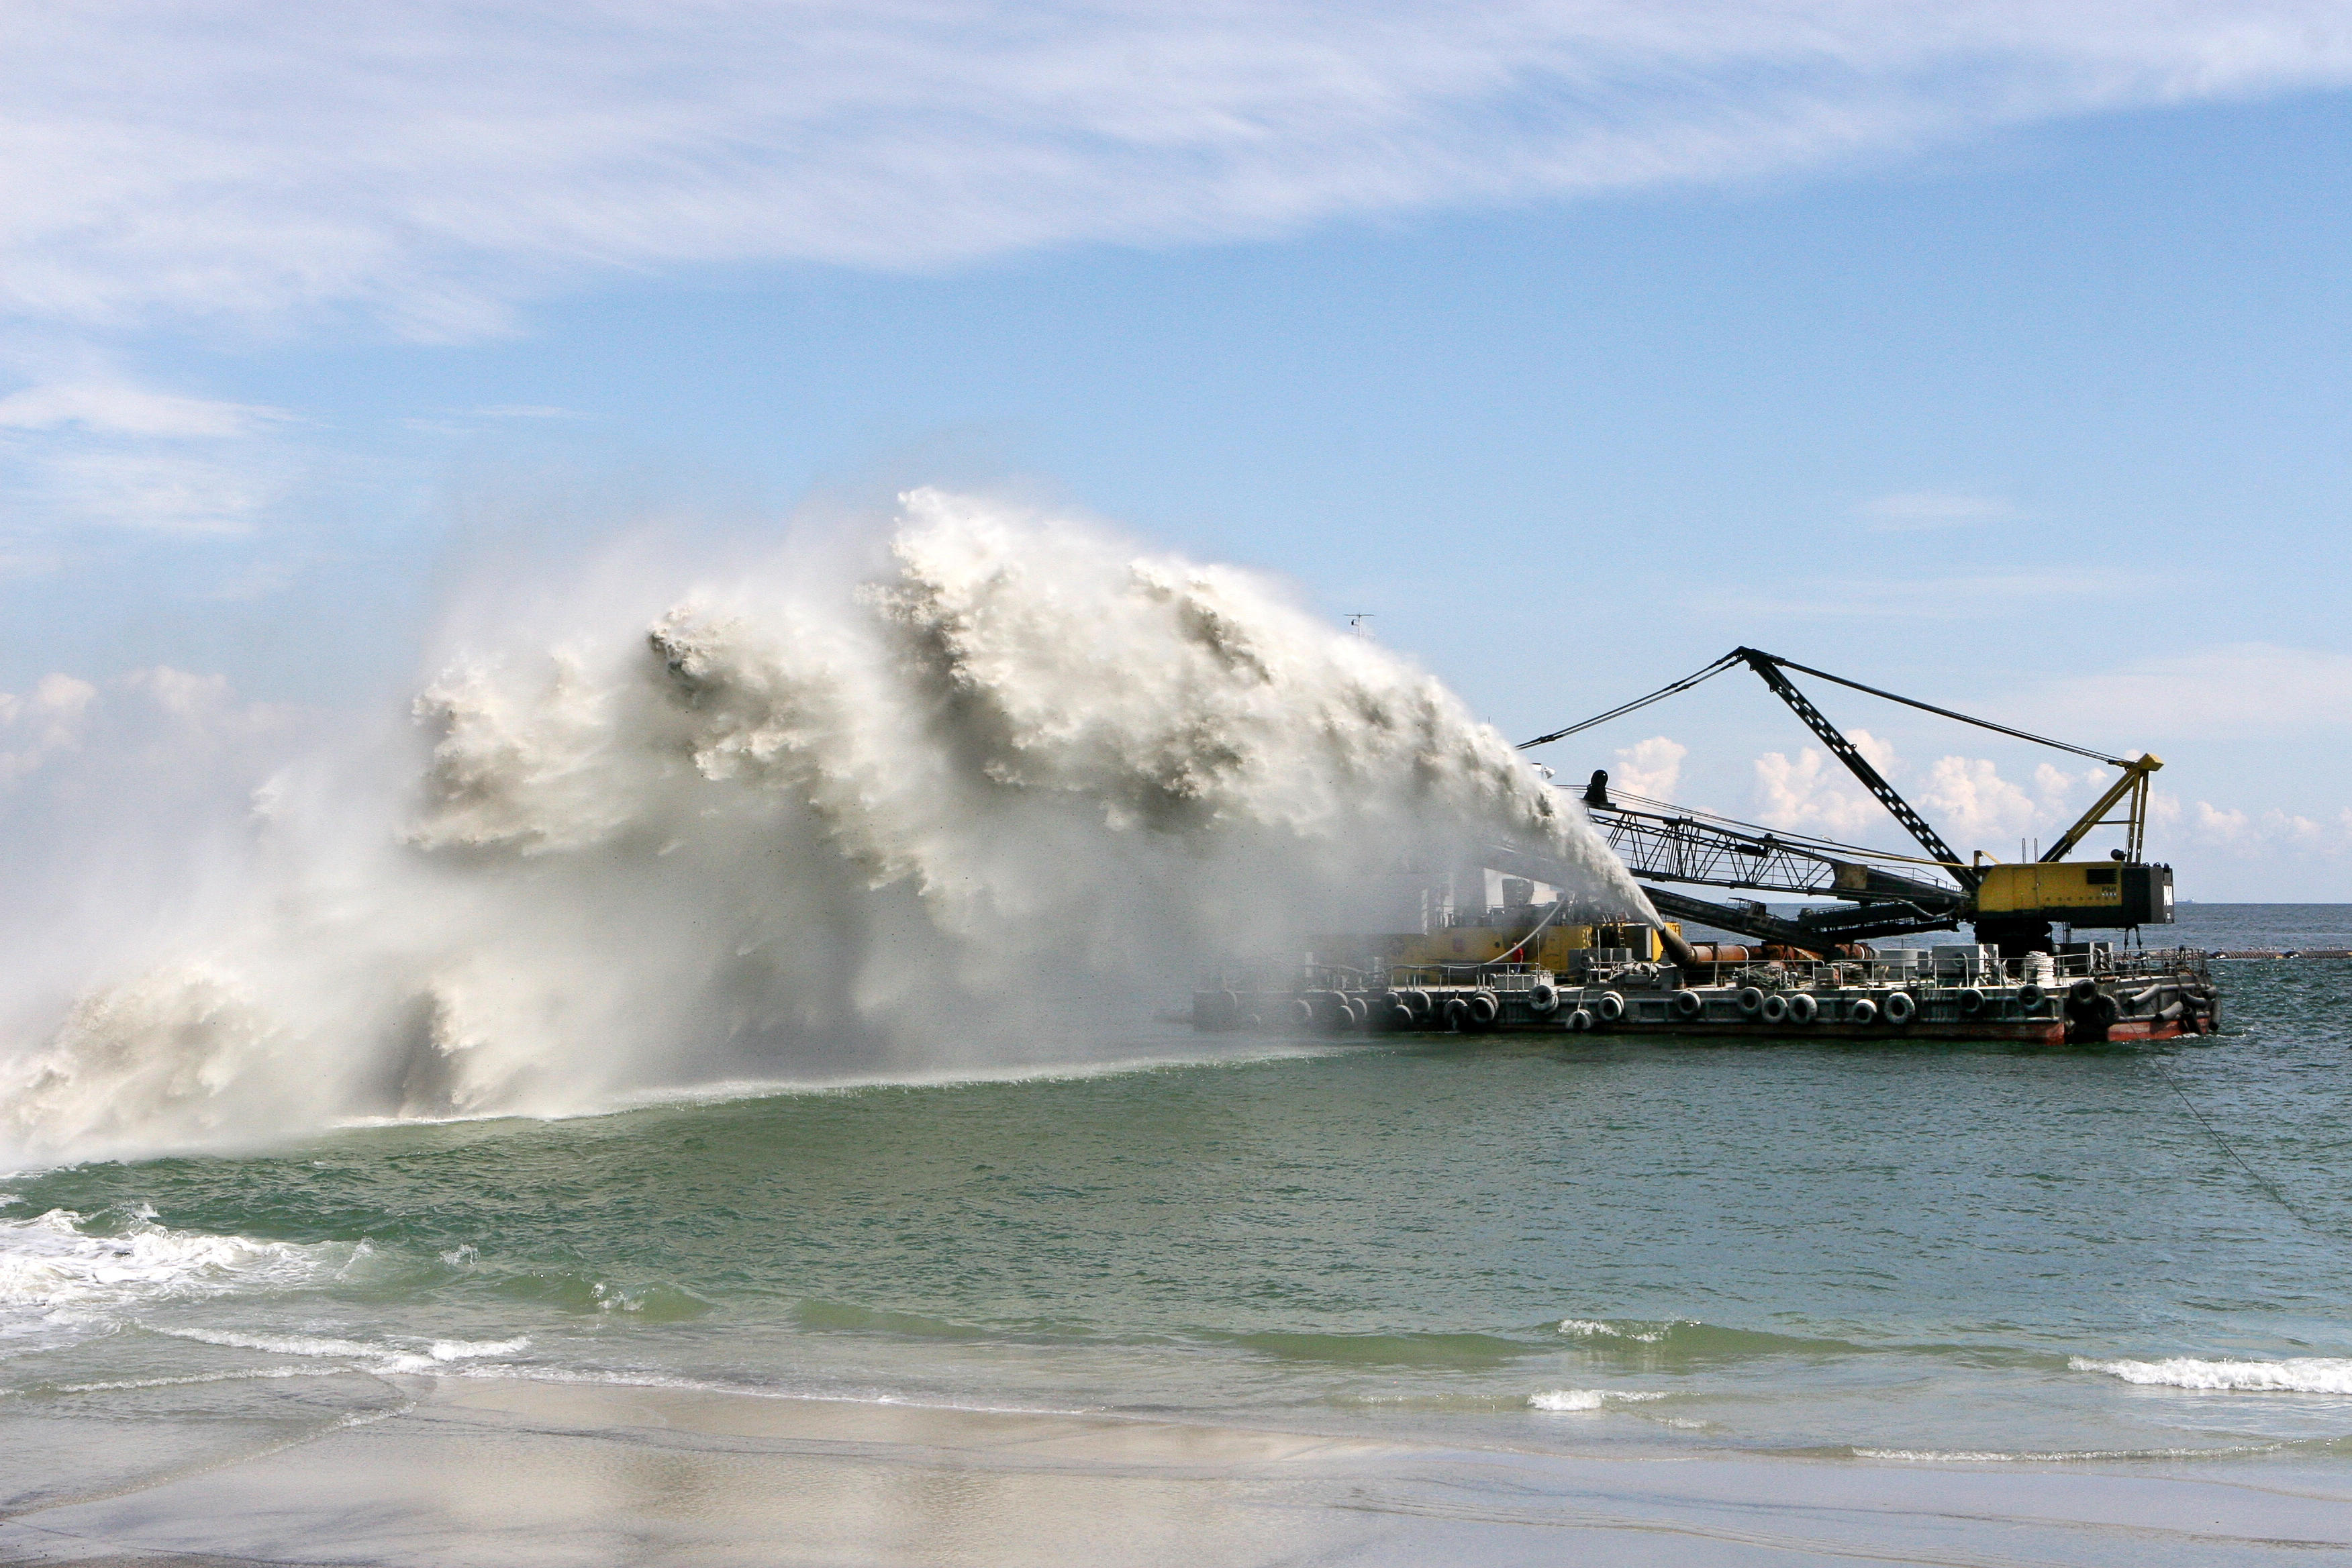 Dredging is a valuable infrastructure investment